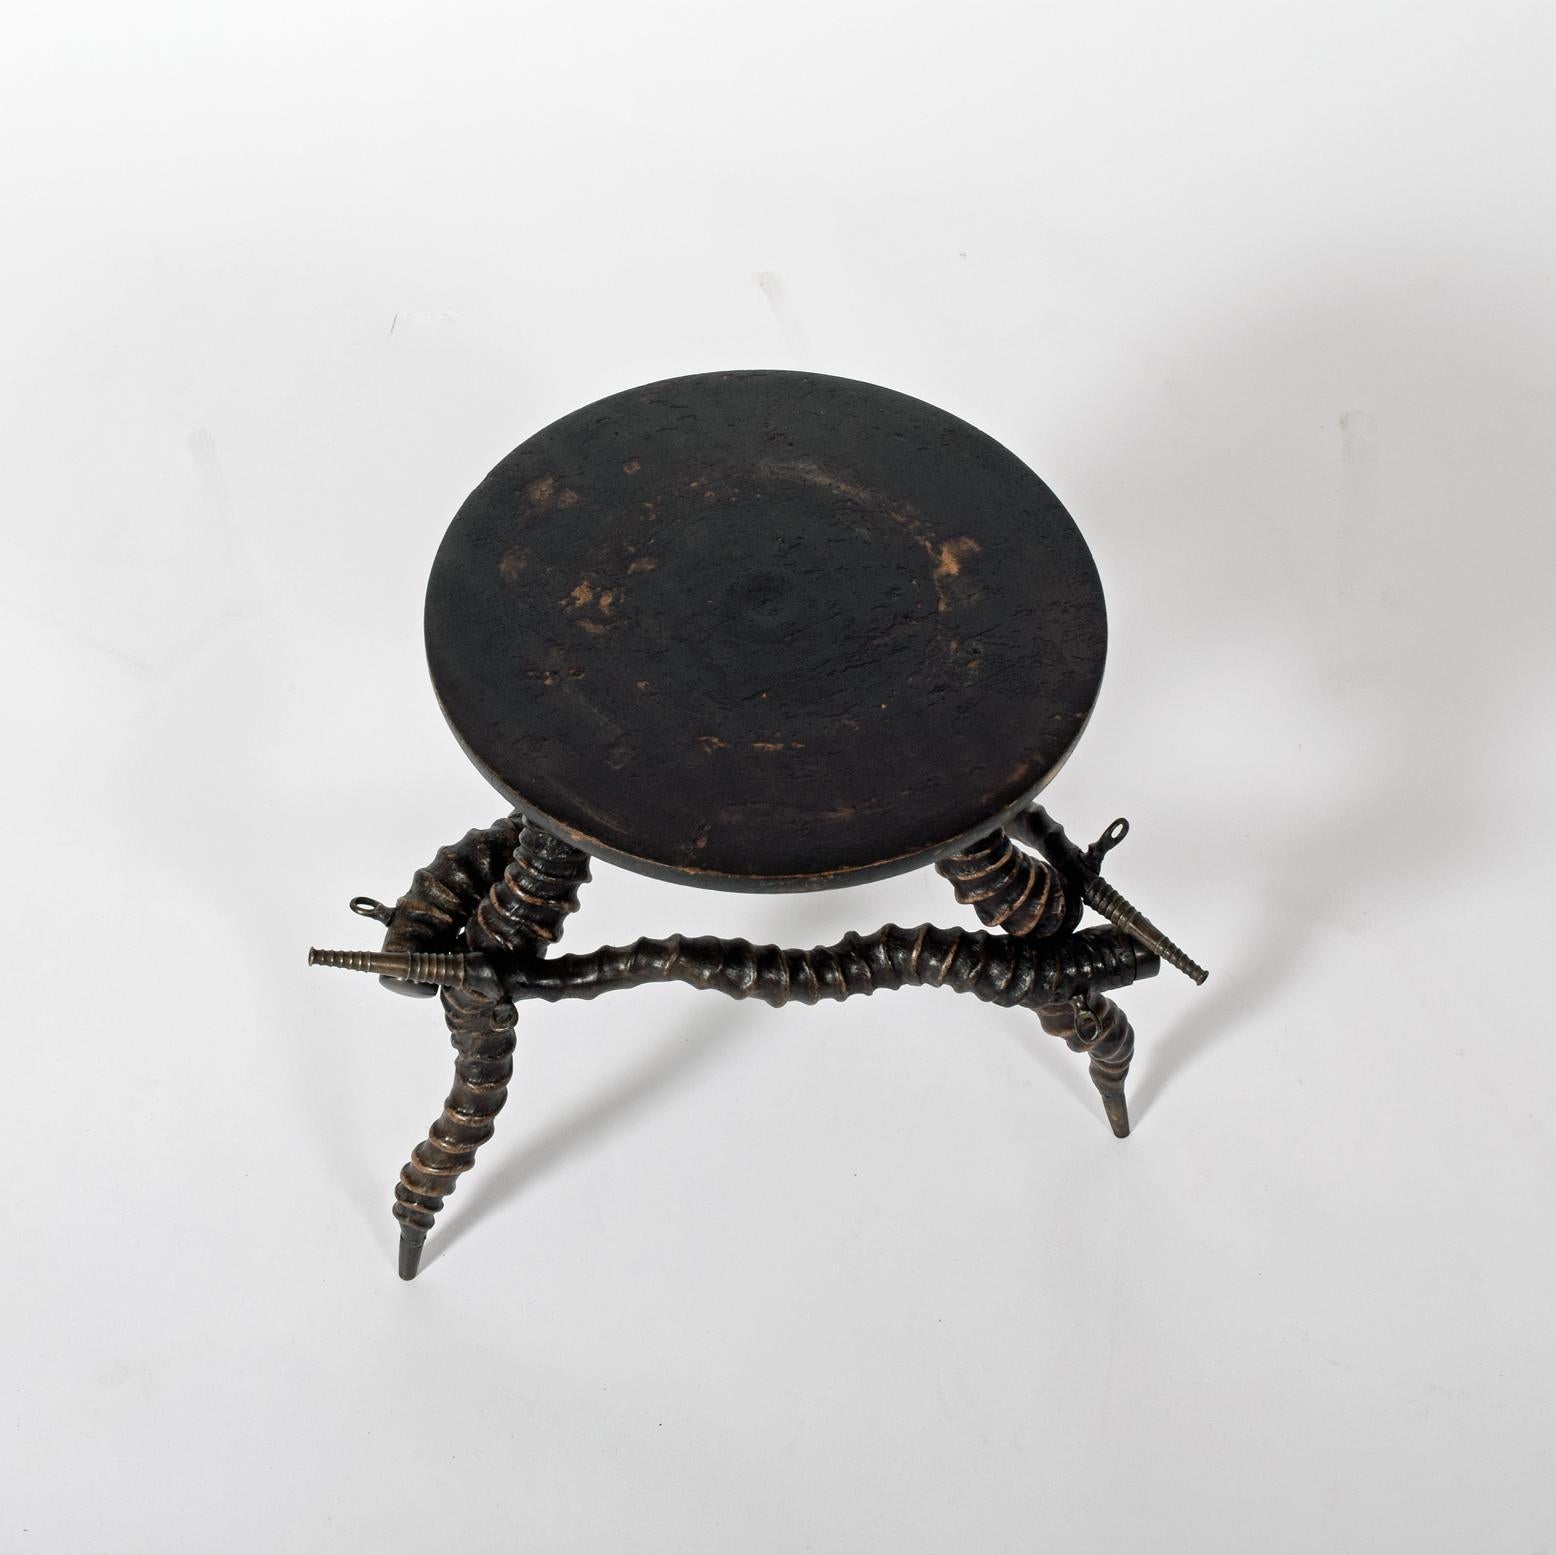 African Kudu horn side table six horns connected with brass fittings and feet, ornaments, round wood top probably made in the 1930s.